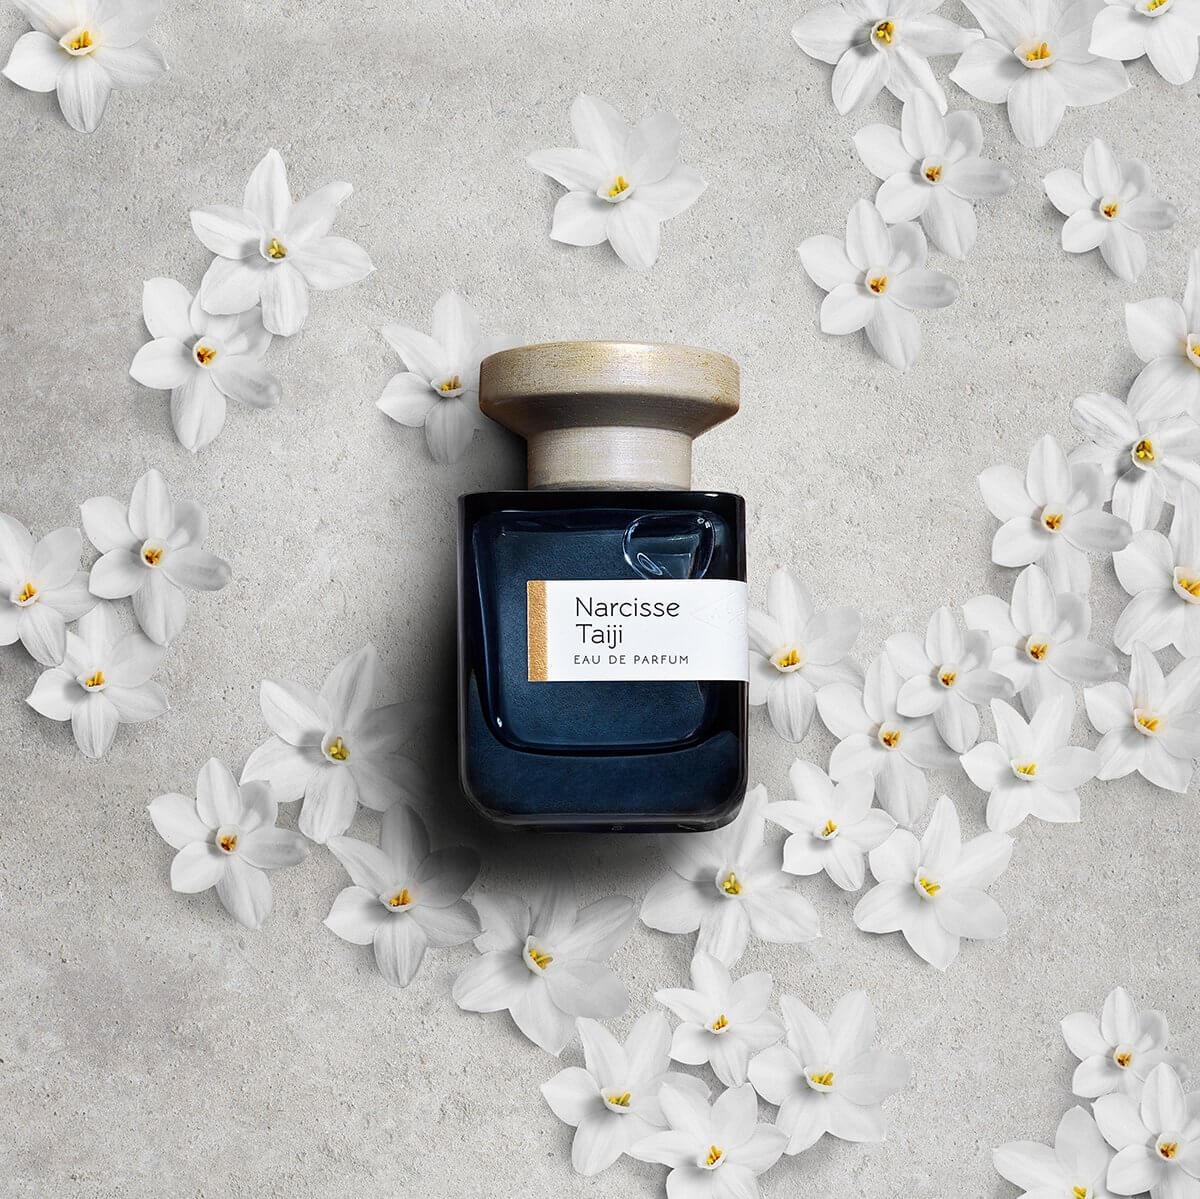 Narcisse Taiji by Atelier Materi with narcissus at Indigo